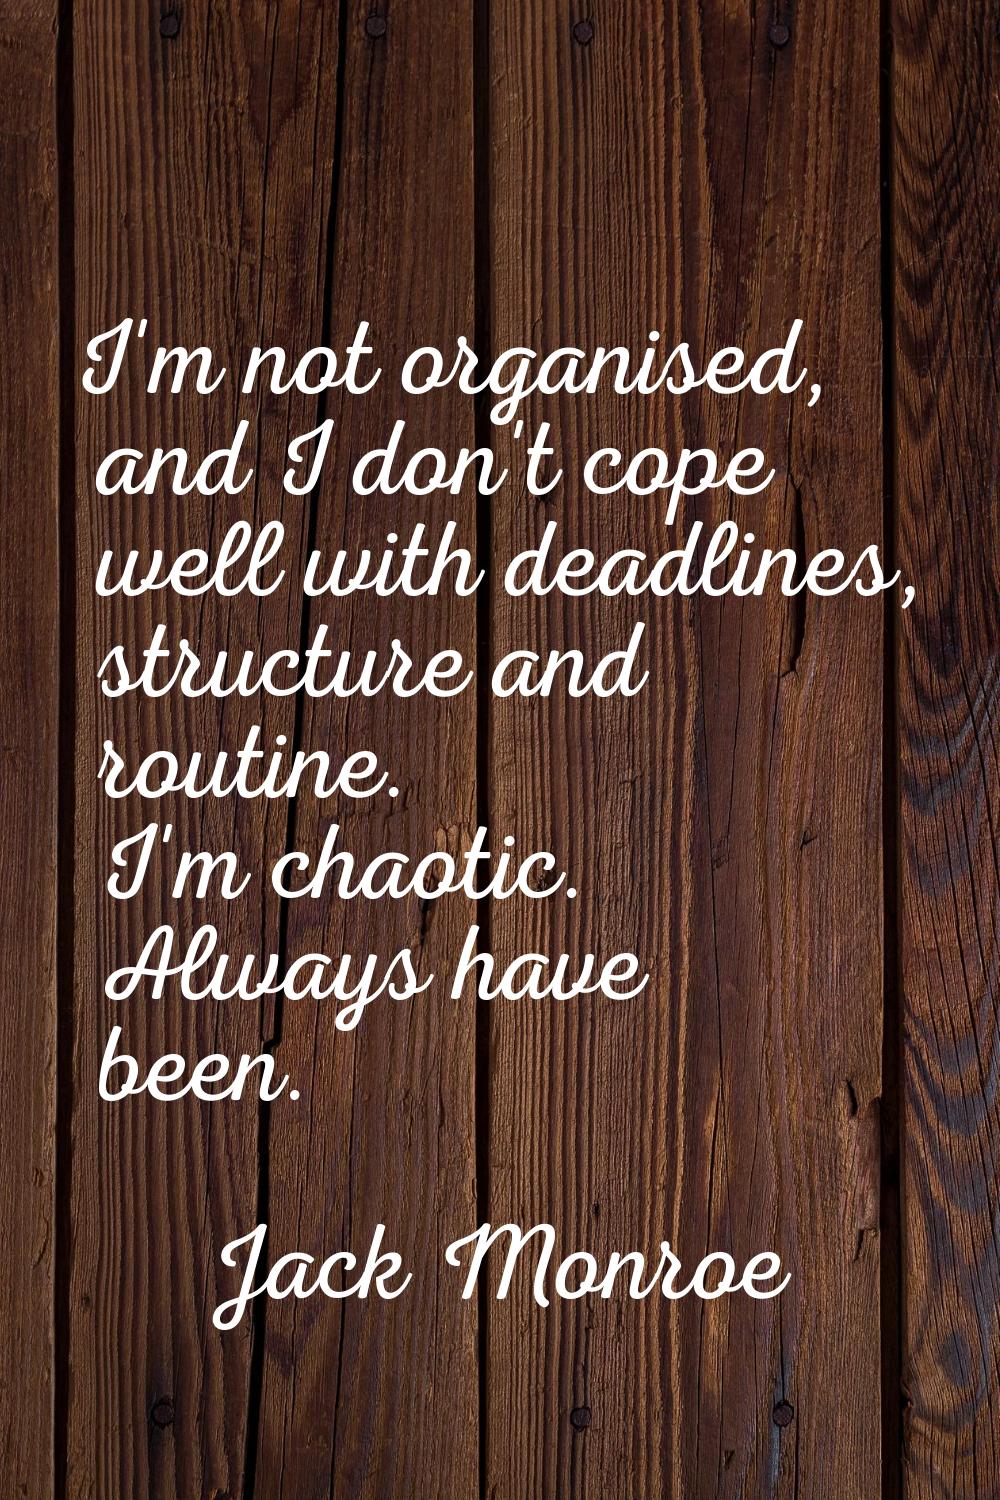 I'm not organised, and I don't cope well with deadlines, structure and routine. I'm chaotic. Always